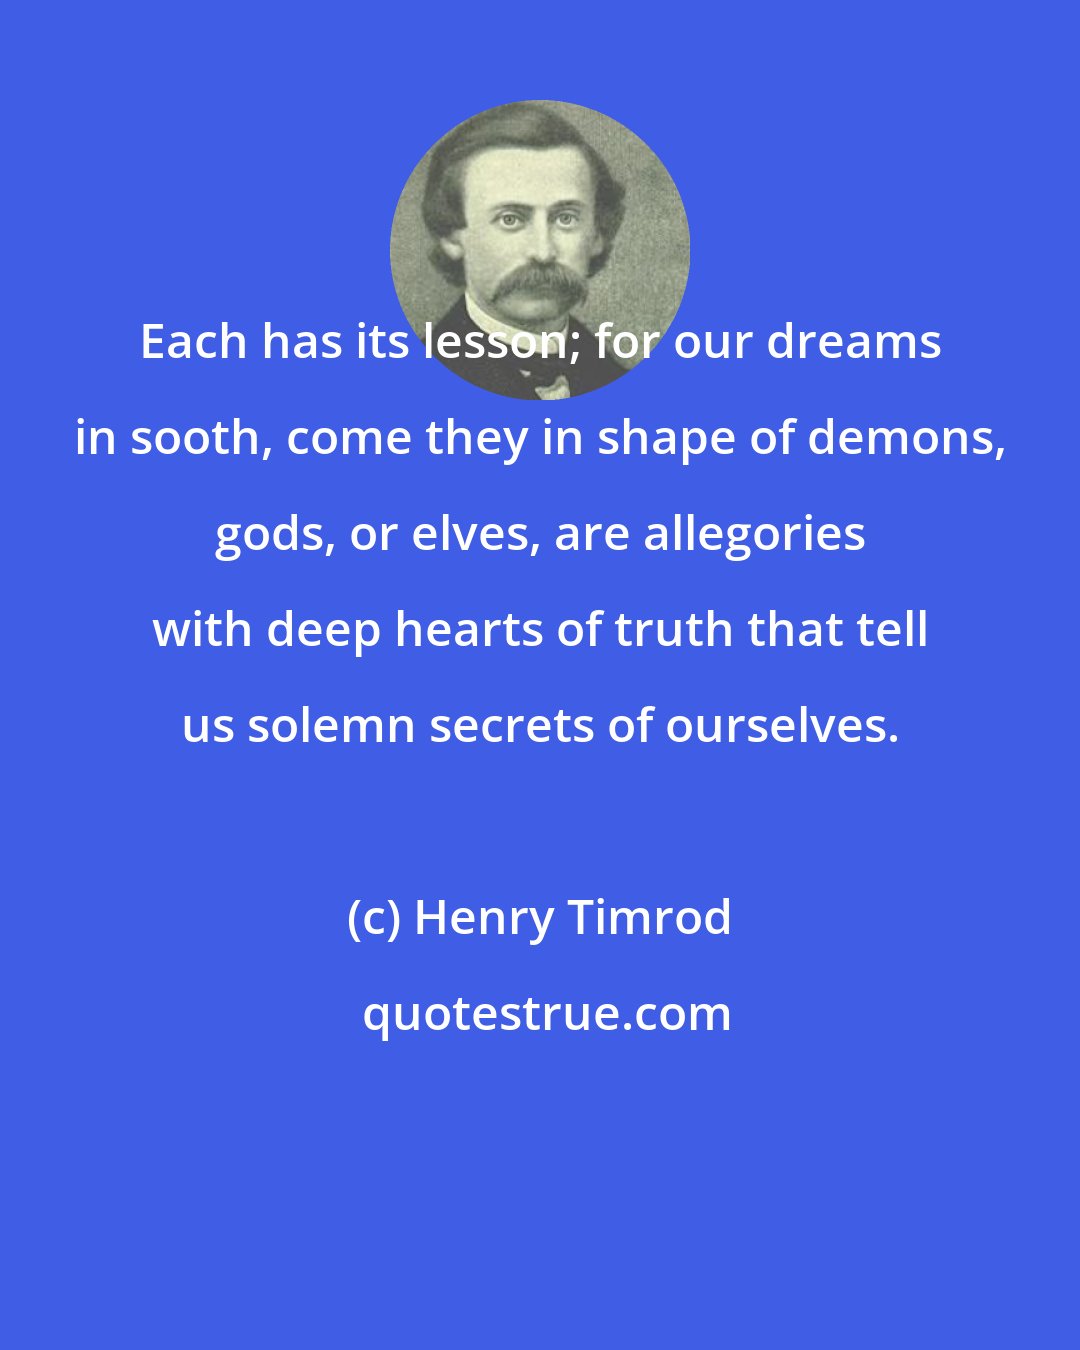 Henry Timrod: Each has its lesson; for our dreams in sooth, come they in shape of demons, gods, or elves, are allegories with deep hearts of truth that tell us solemn secrets of ourselves.